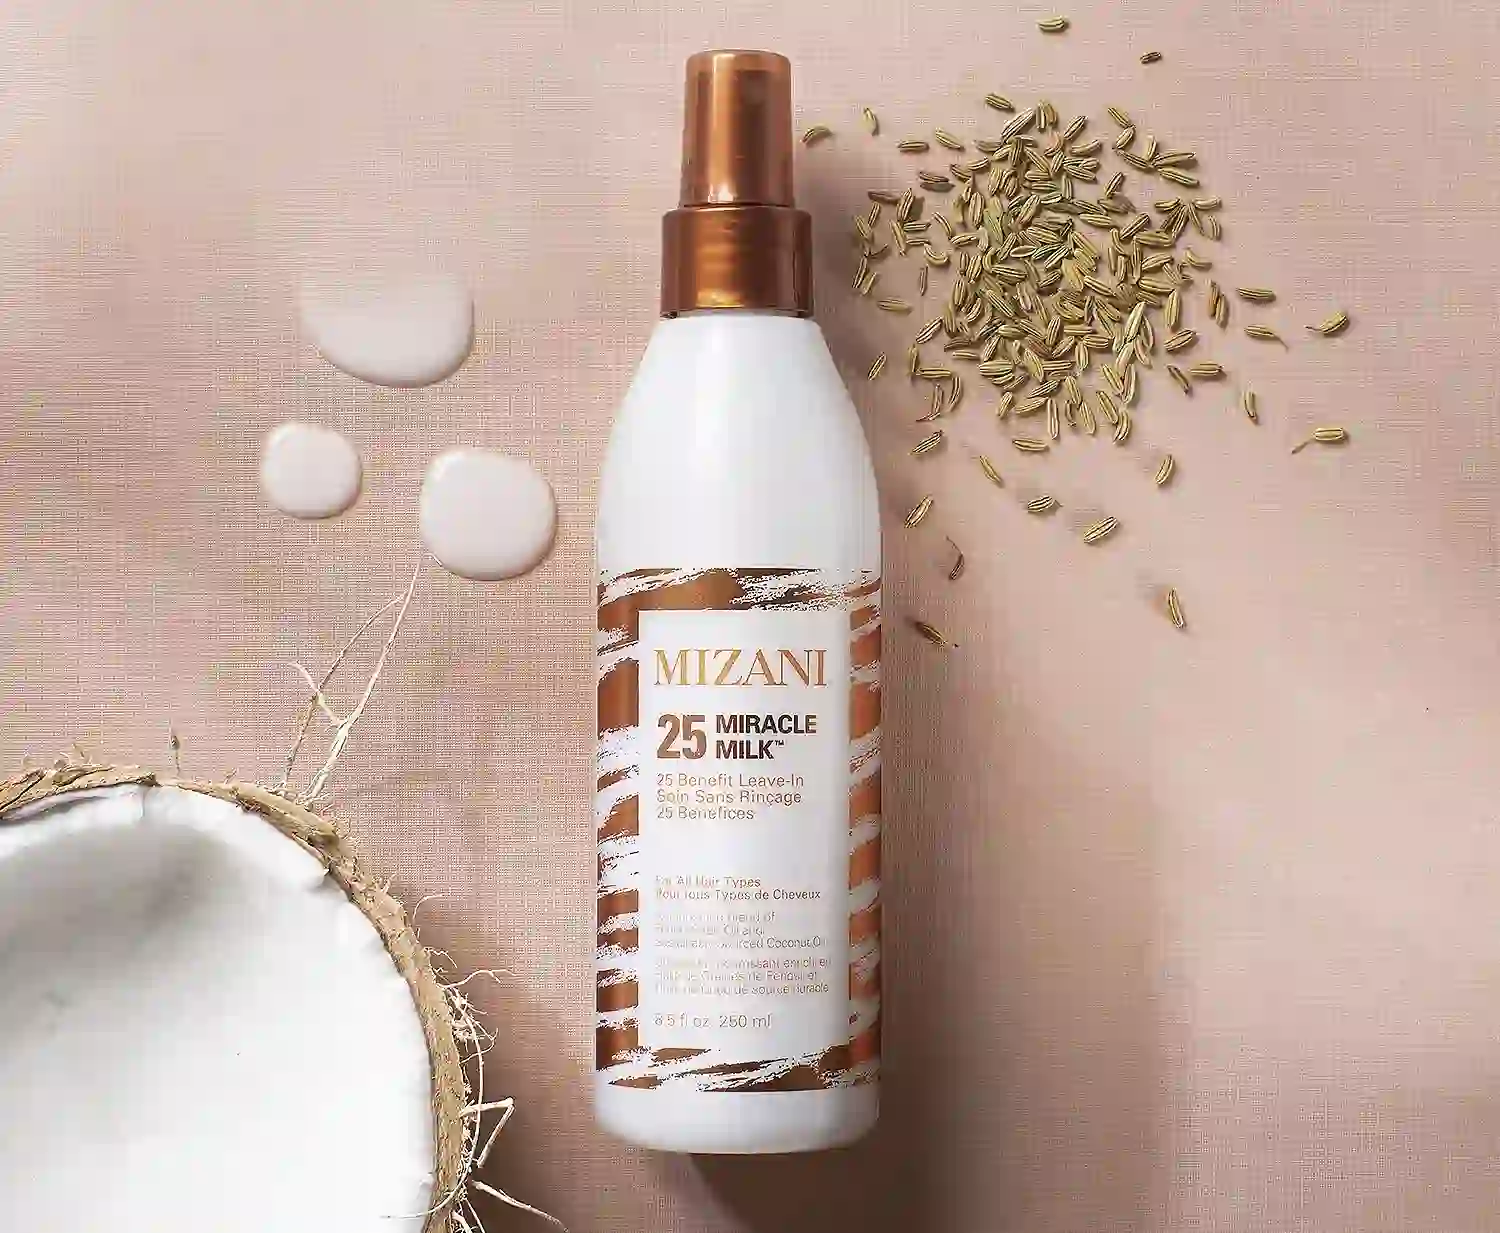 You are currently viewing Mizani Leave-in Conditioner Review: Is it a Scam?